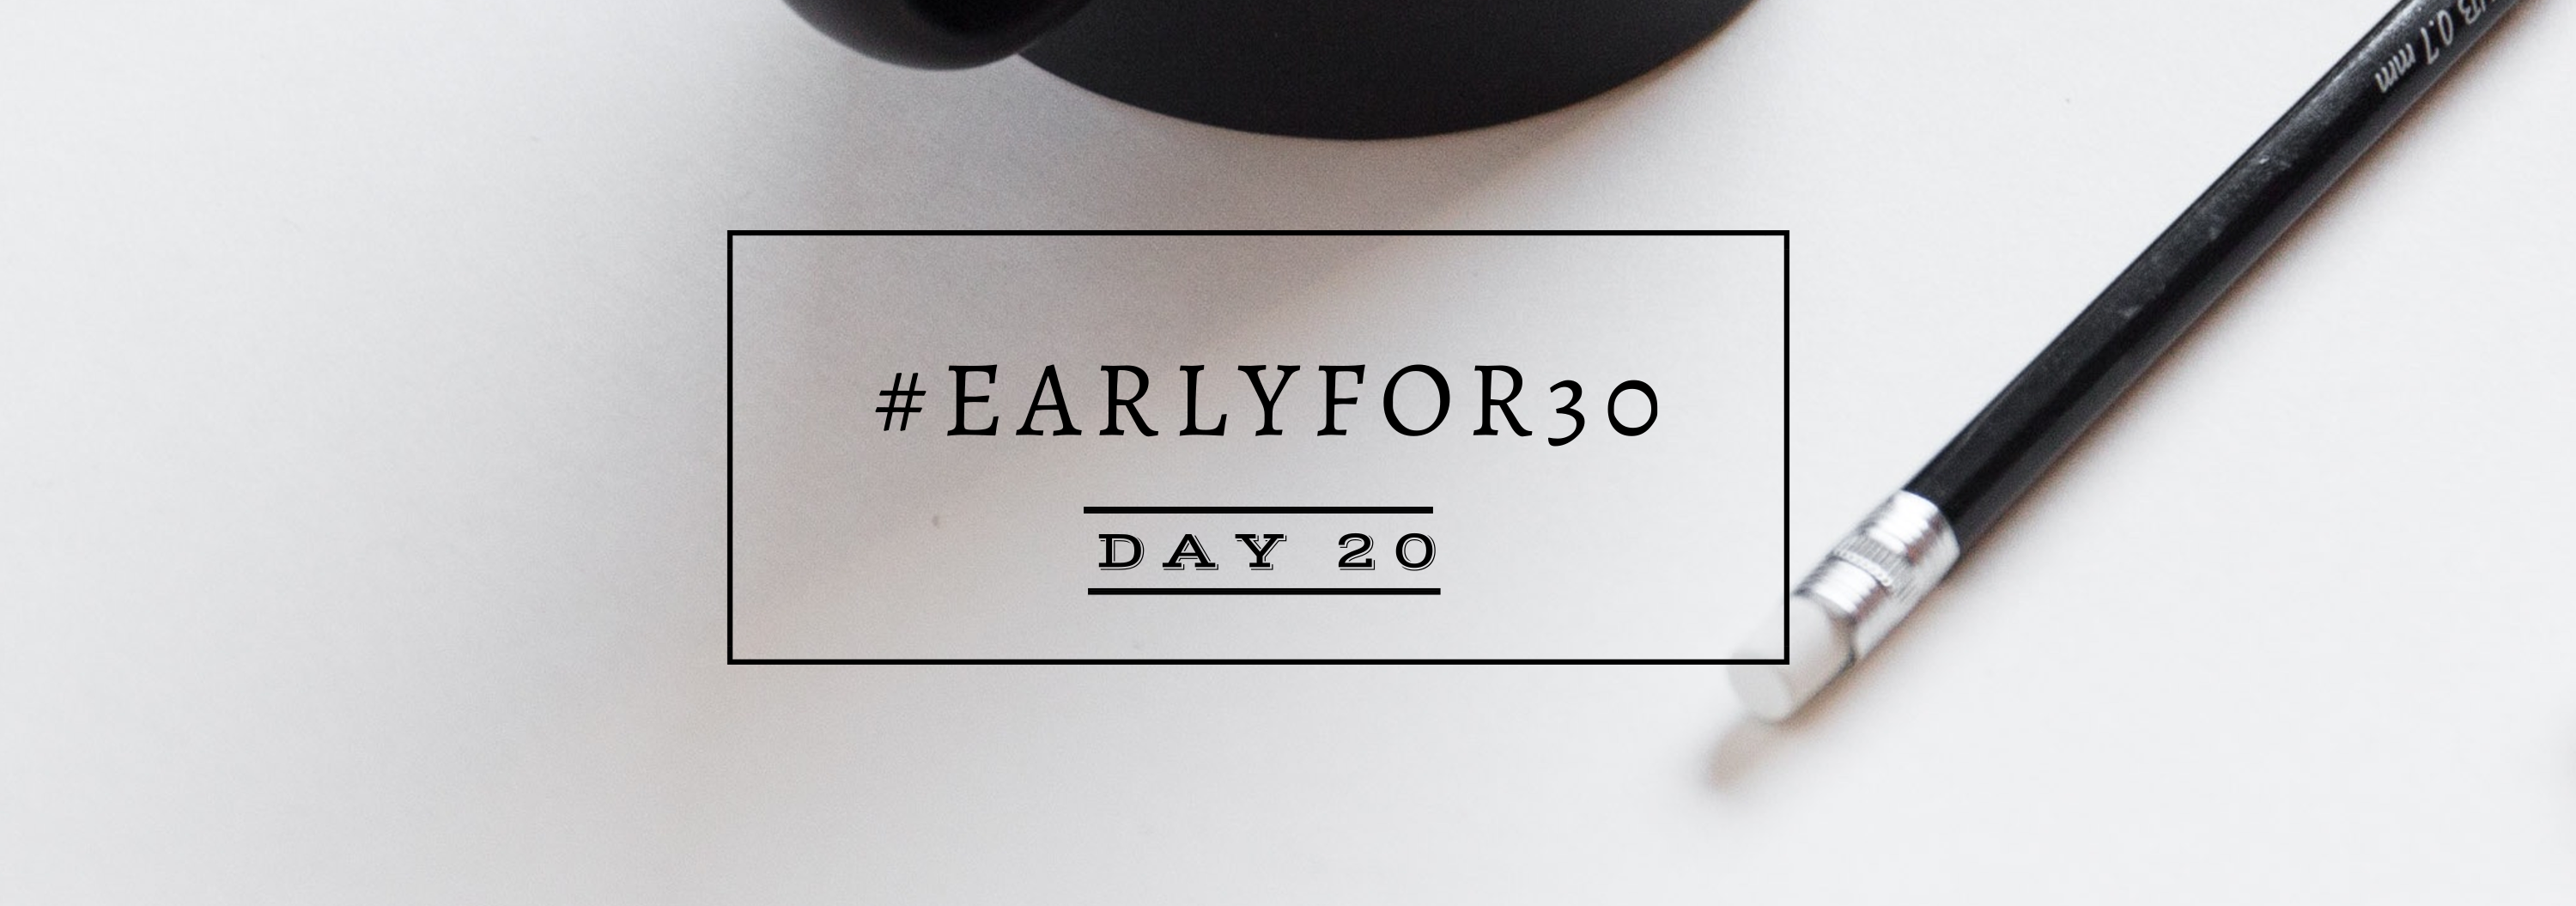 Day 20 Early for 30 Days